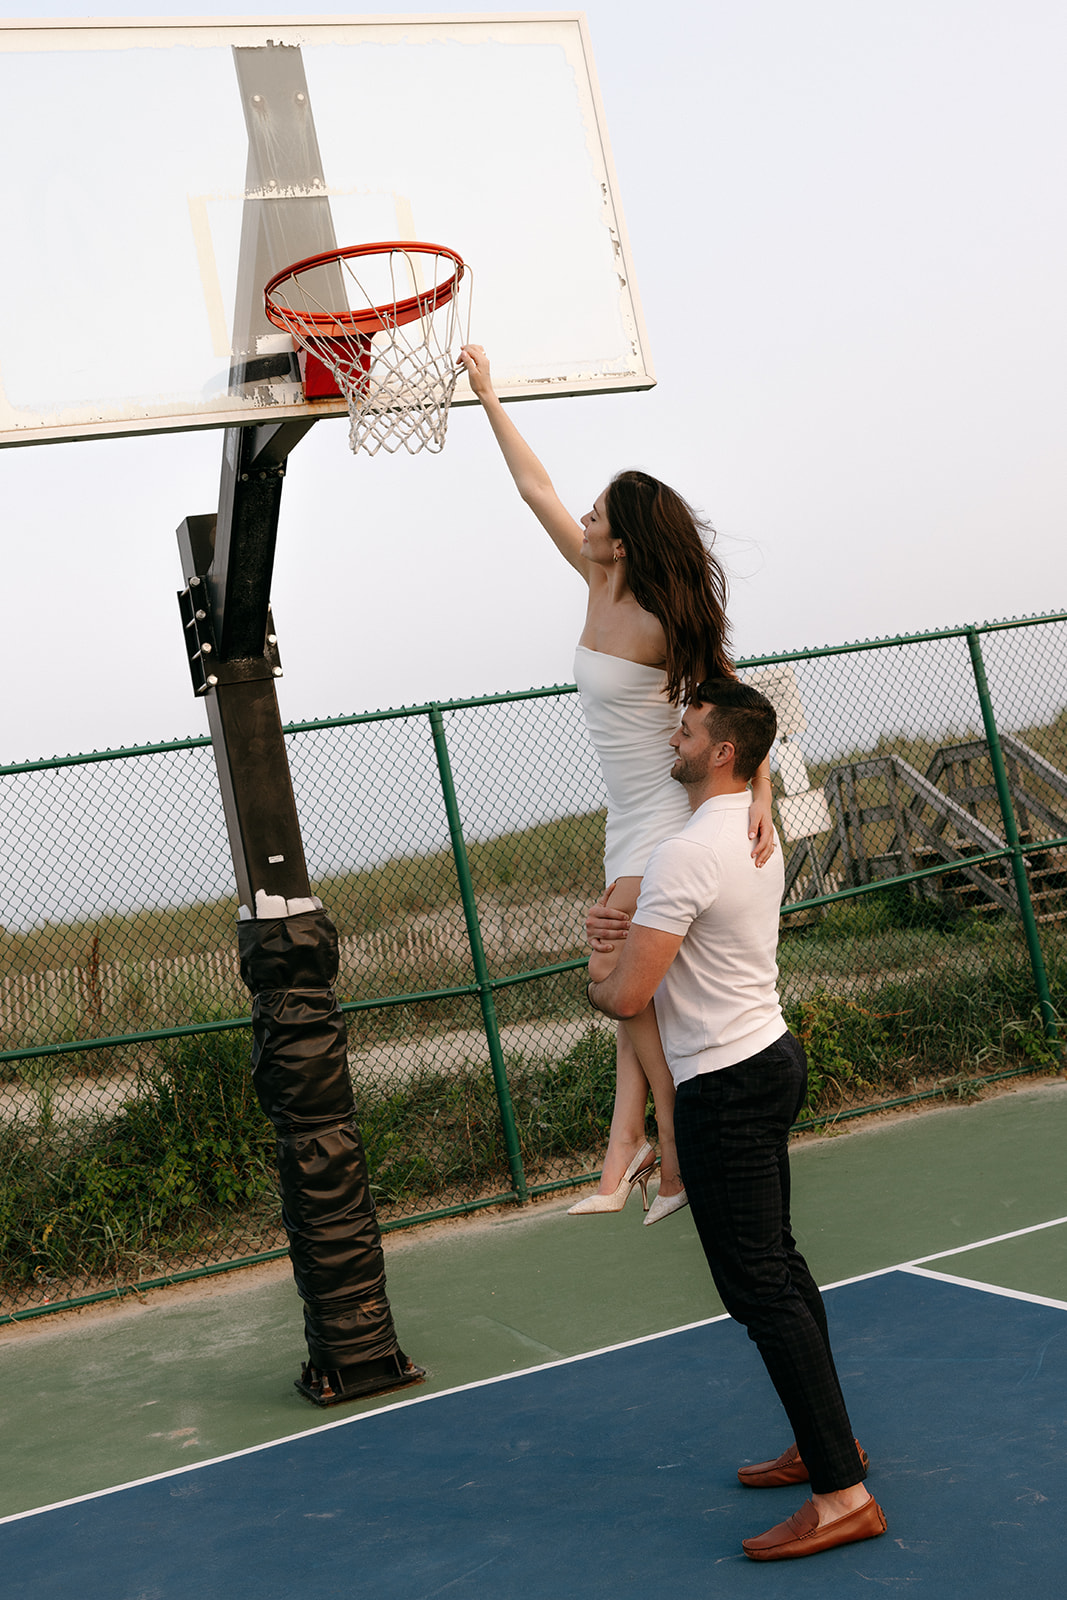 A candid couple engagement session on a basketball court